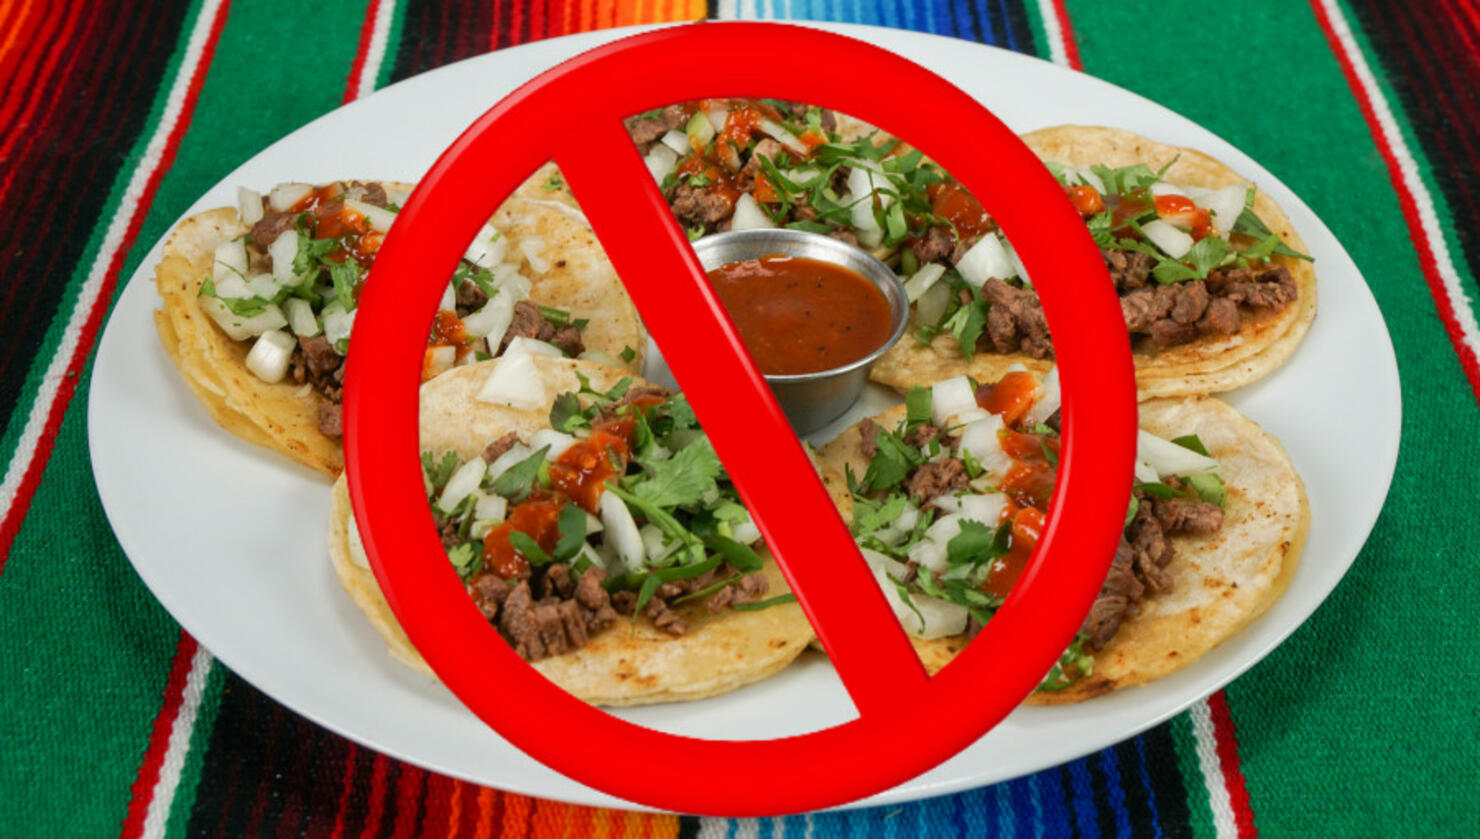 Oklahoma Taco Fest Canceled After Multiple Complaints About Organizers